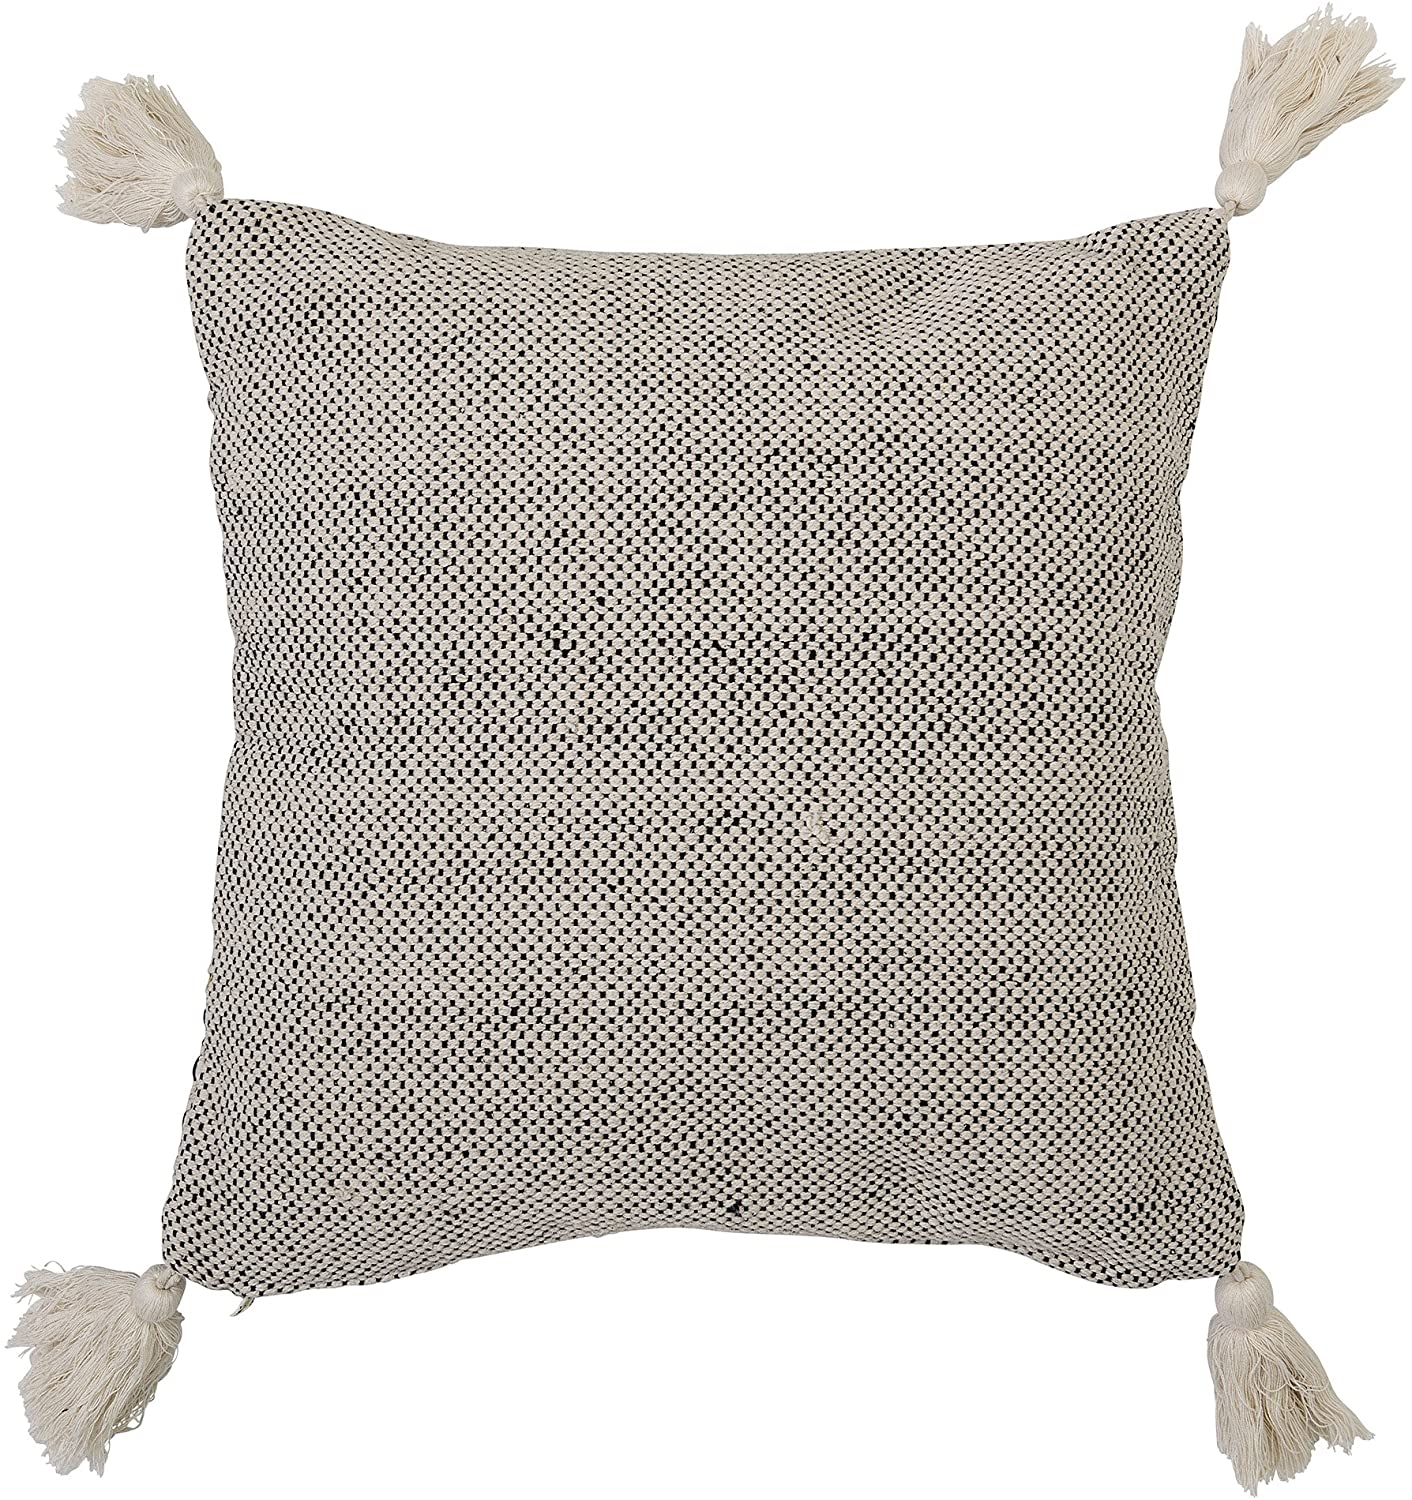 Square Pillow with Corner Tassels, Beige Cotton, 18" x 18" - Image 1